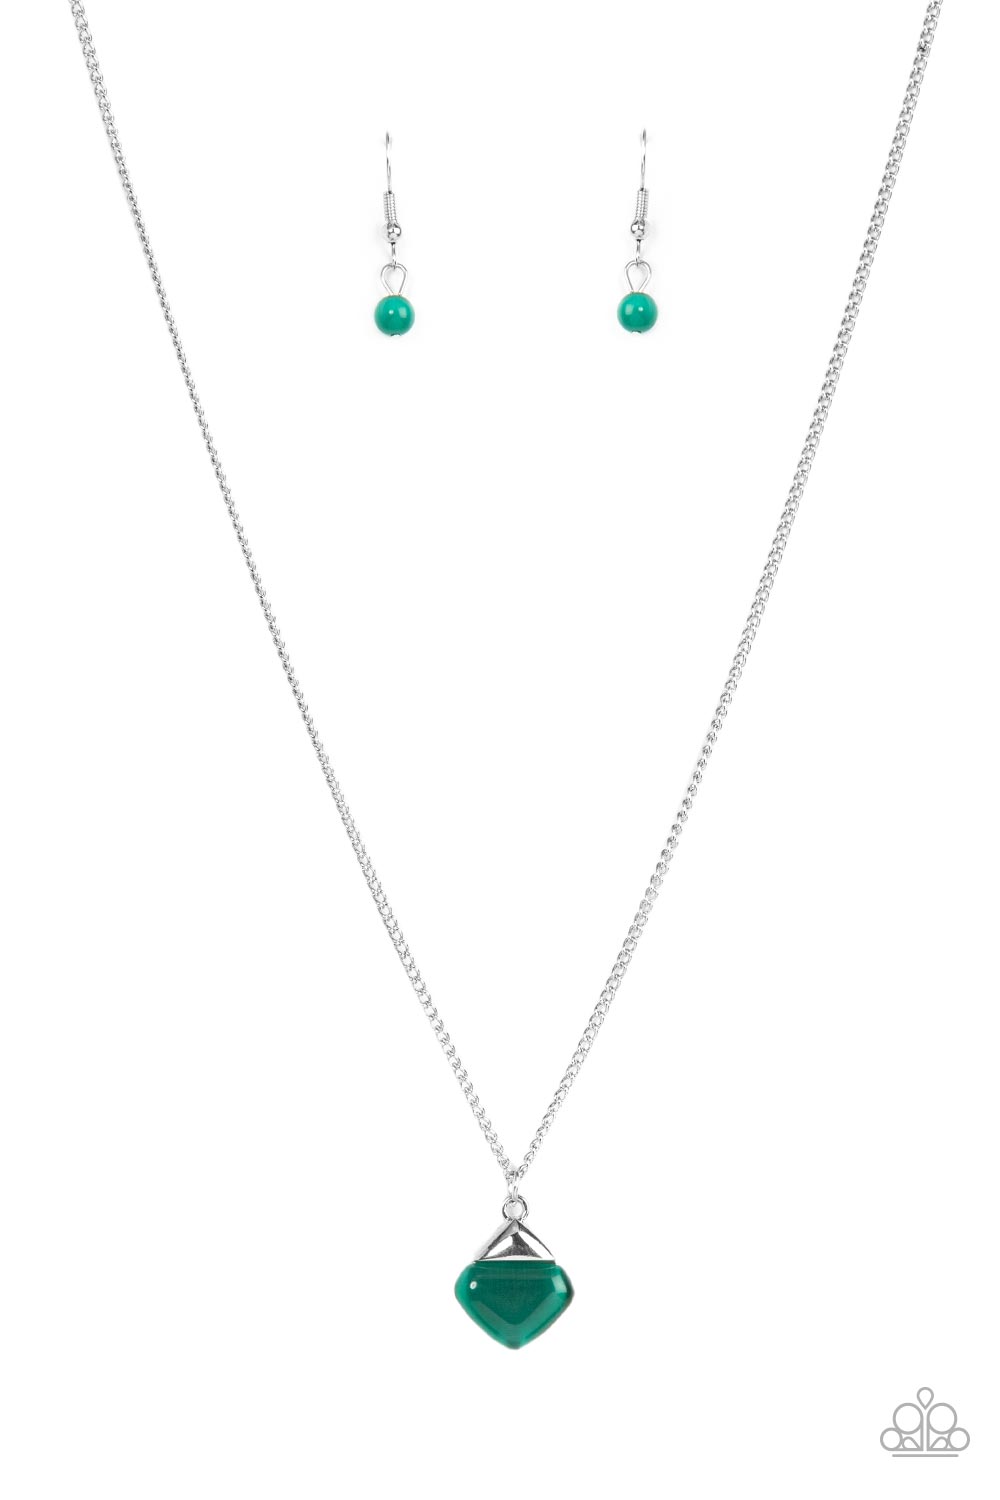 Gracefully Gemstone - Green Cat's Eye Stone - Silver Necklace Shorter Necklaces Bejeweled Accessories By Kristie Featuring Paparazzi Jewelry  - Trendy fashion jewelry for everyone -